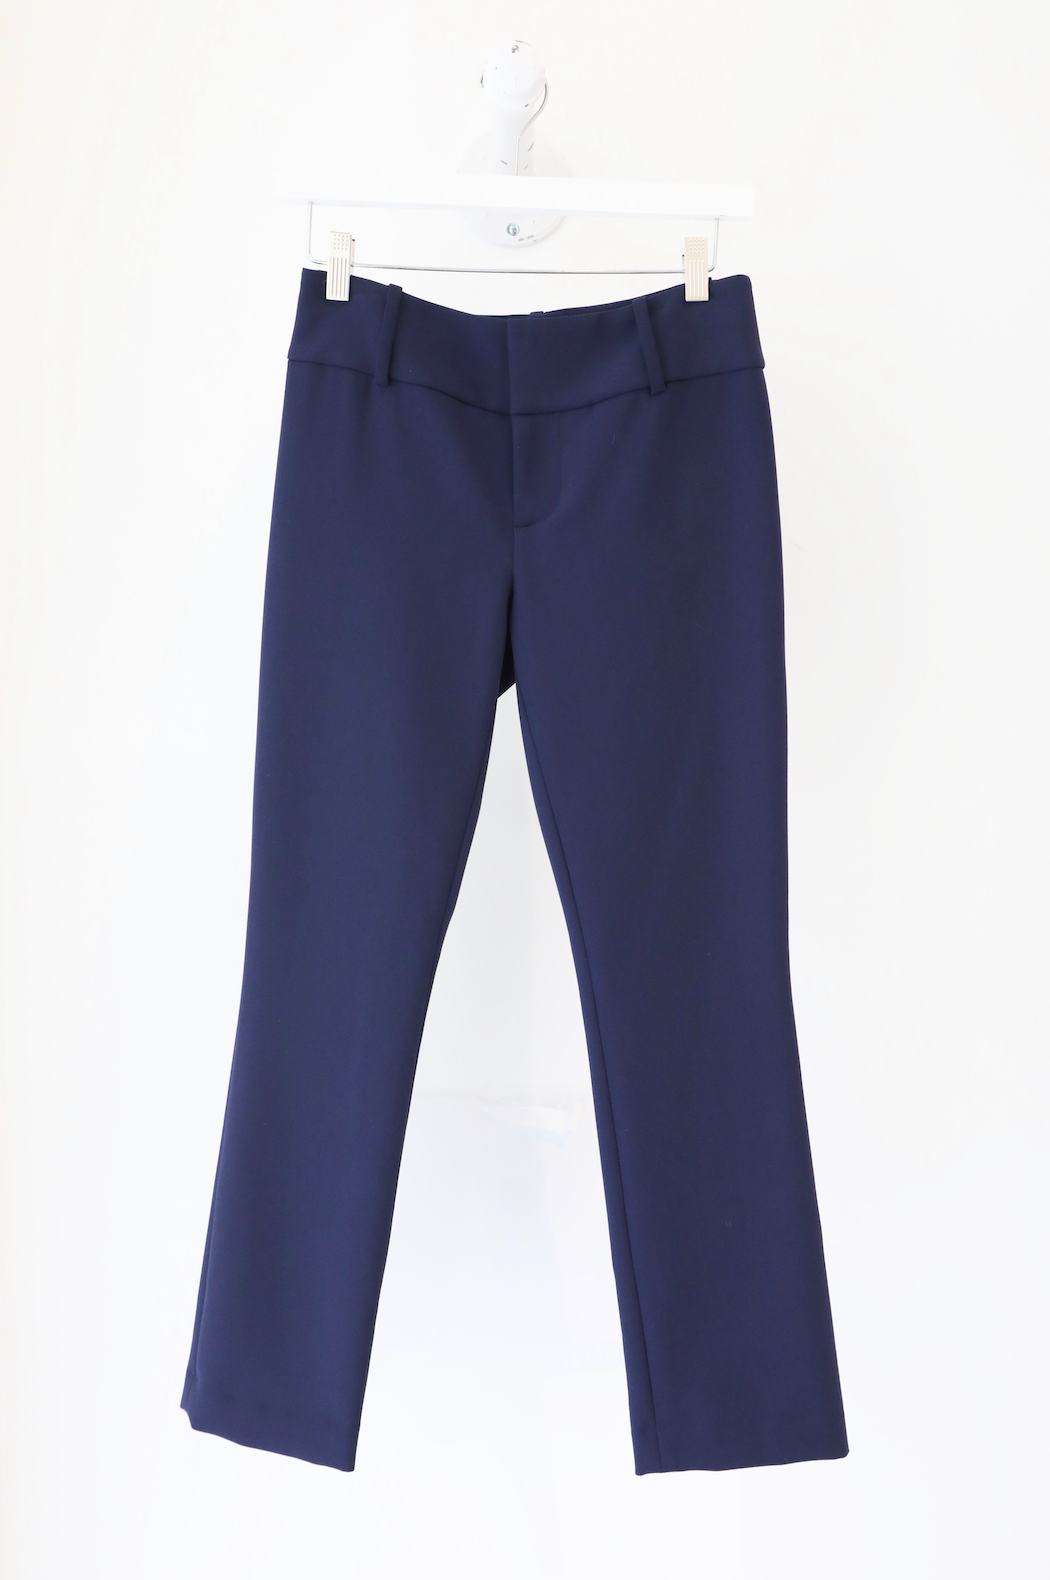 Alice + Olivia - Stacey Slim Ankle Pant in Sapphire